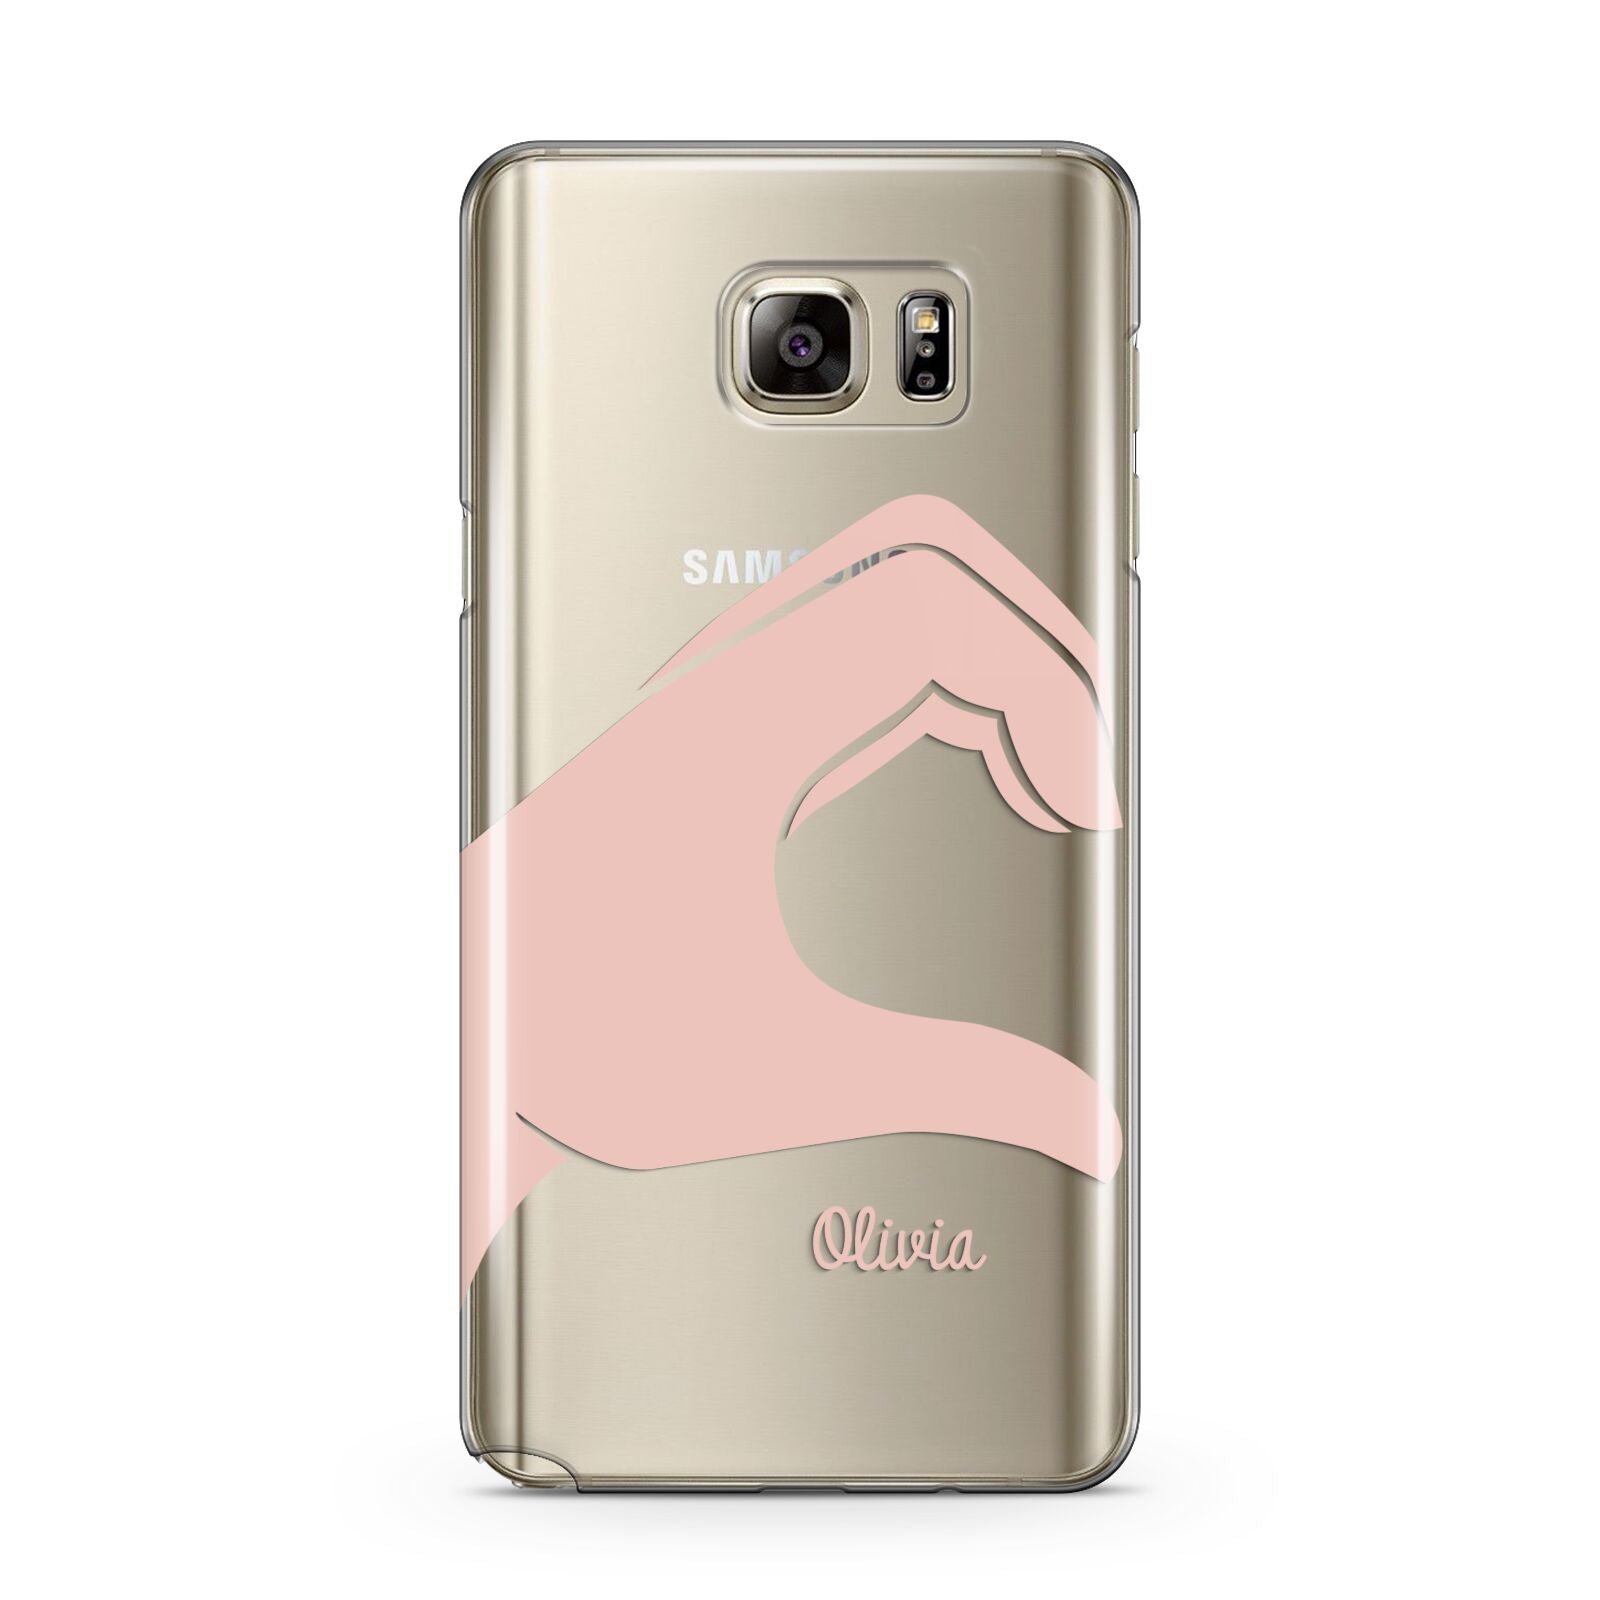 Left Hand in Half Heart with Name Samsung Galaxy Note 5 Case